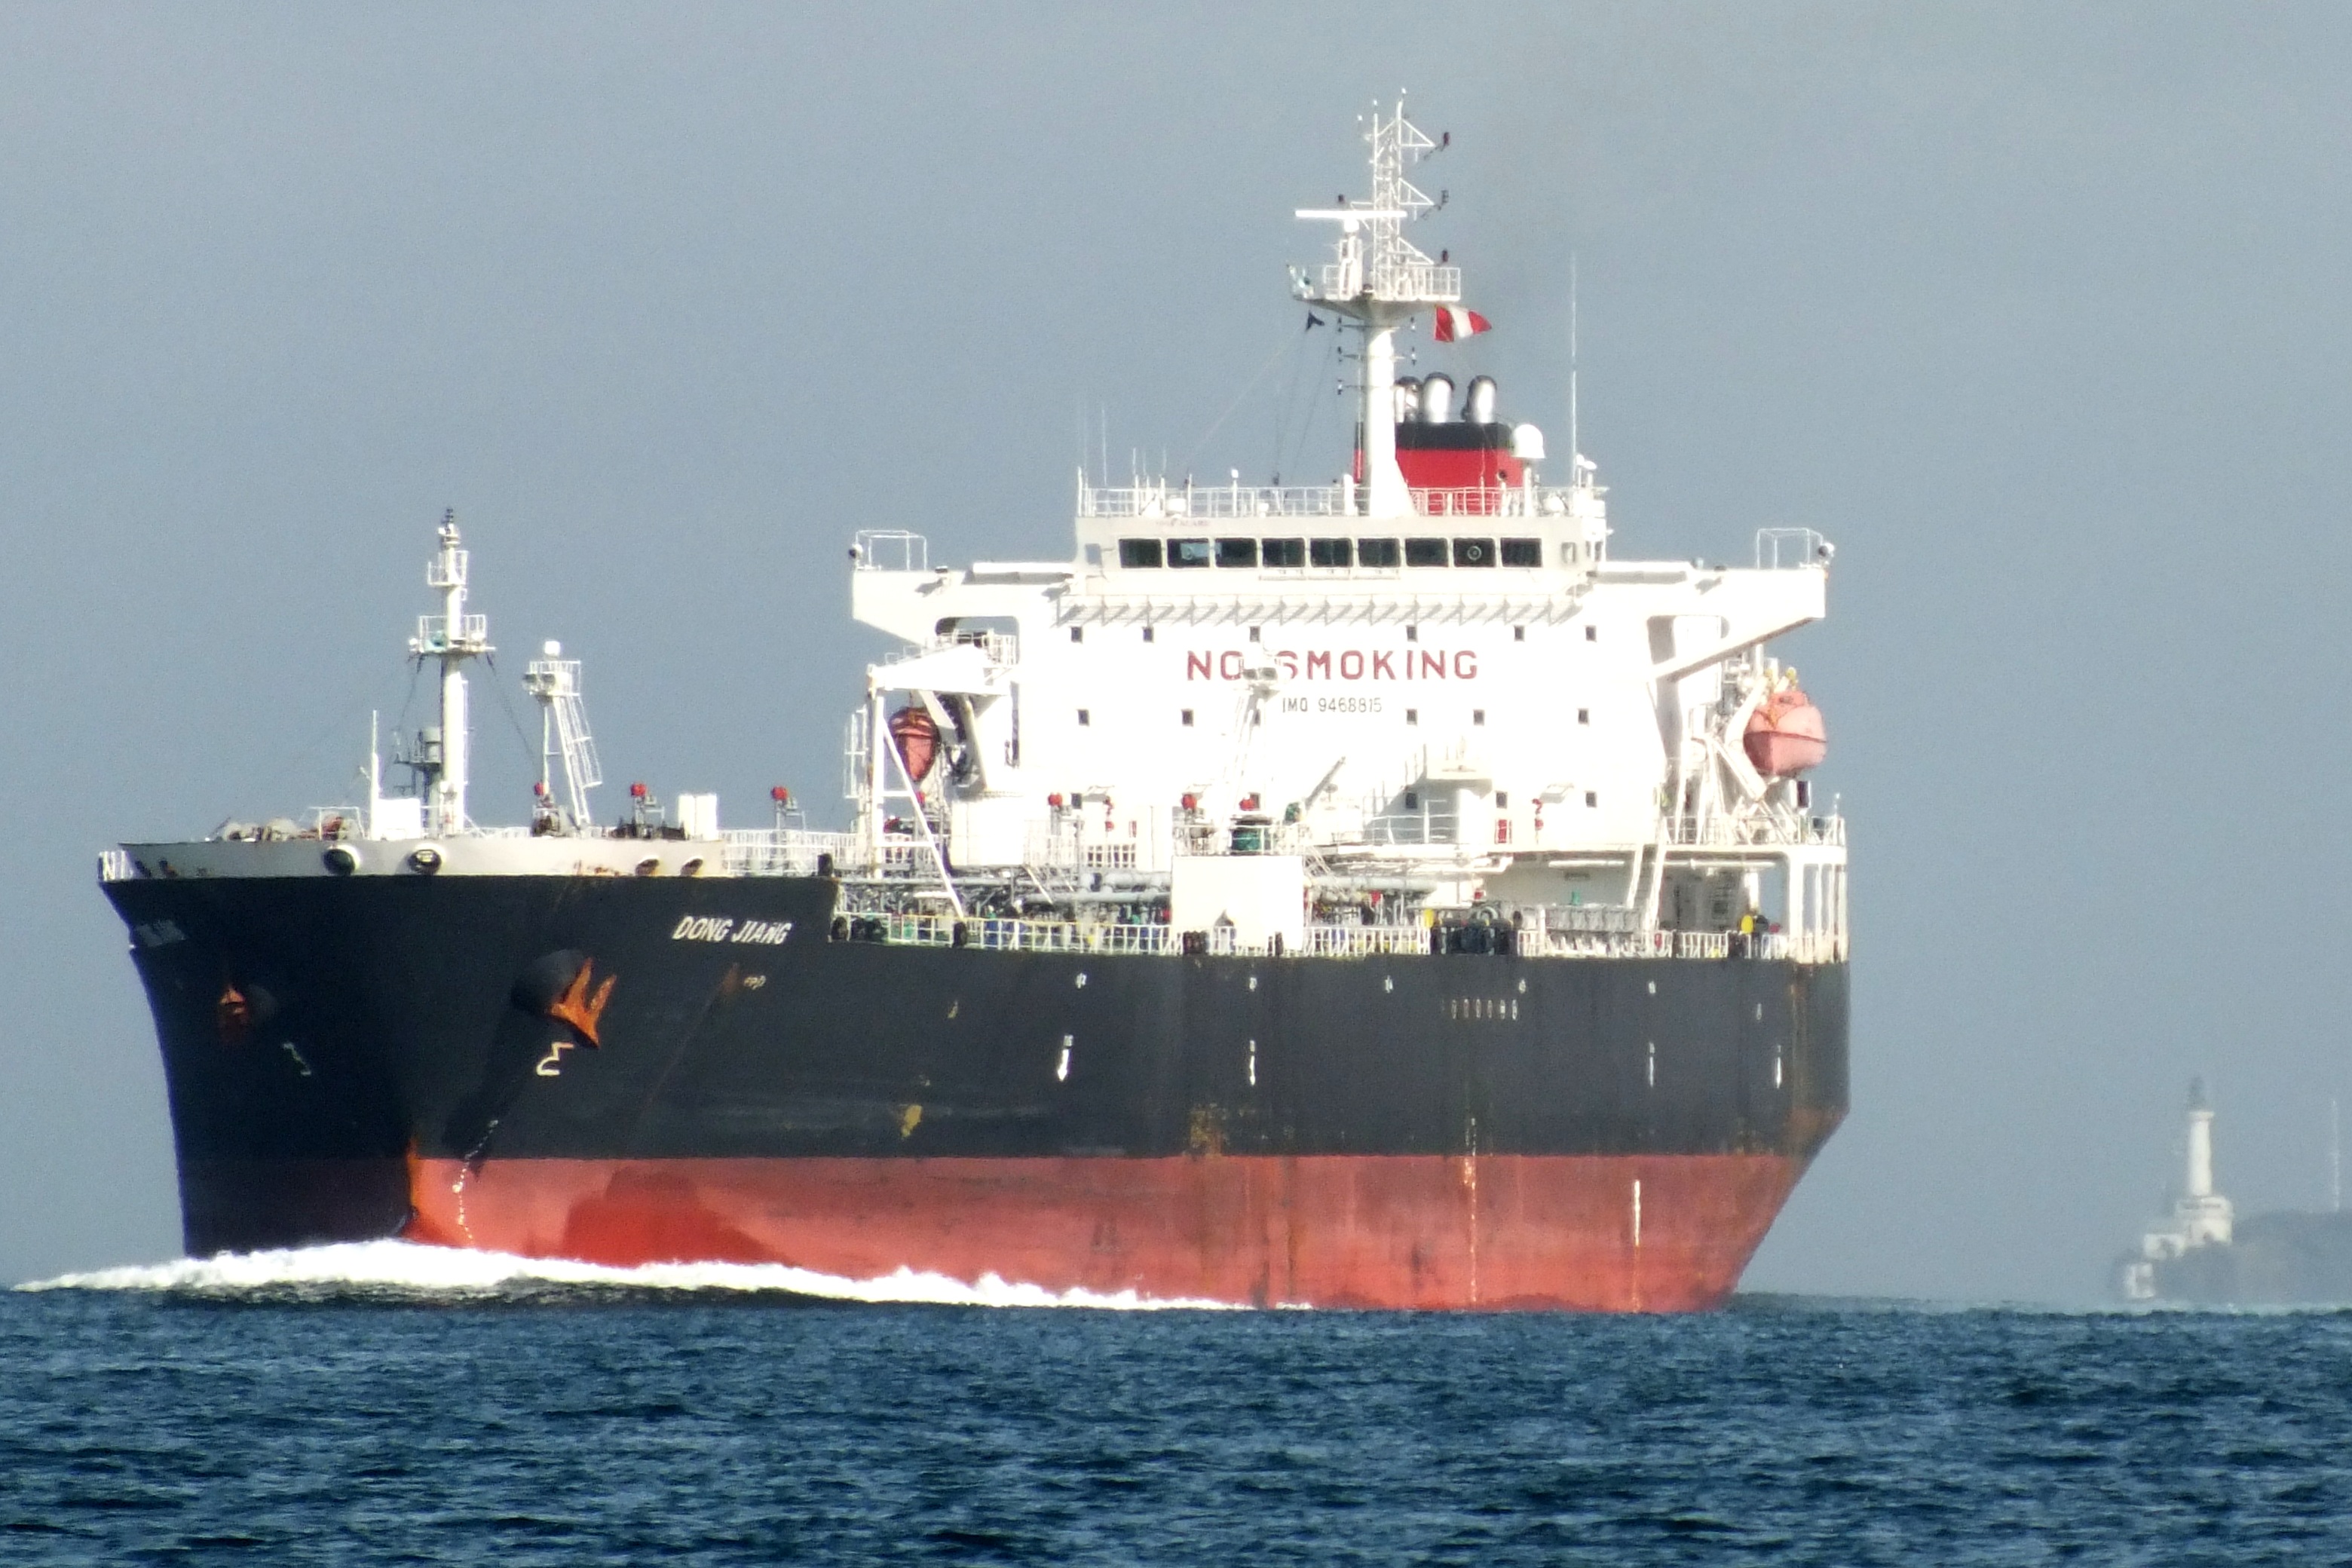 “Legislation to remove crude export restrictions is not needed at this time”